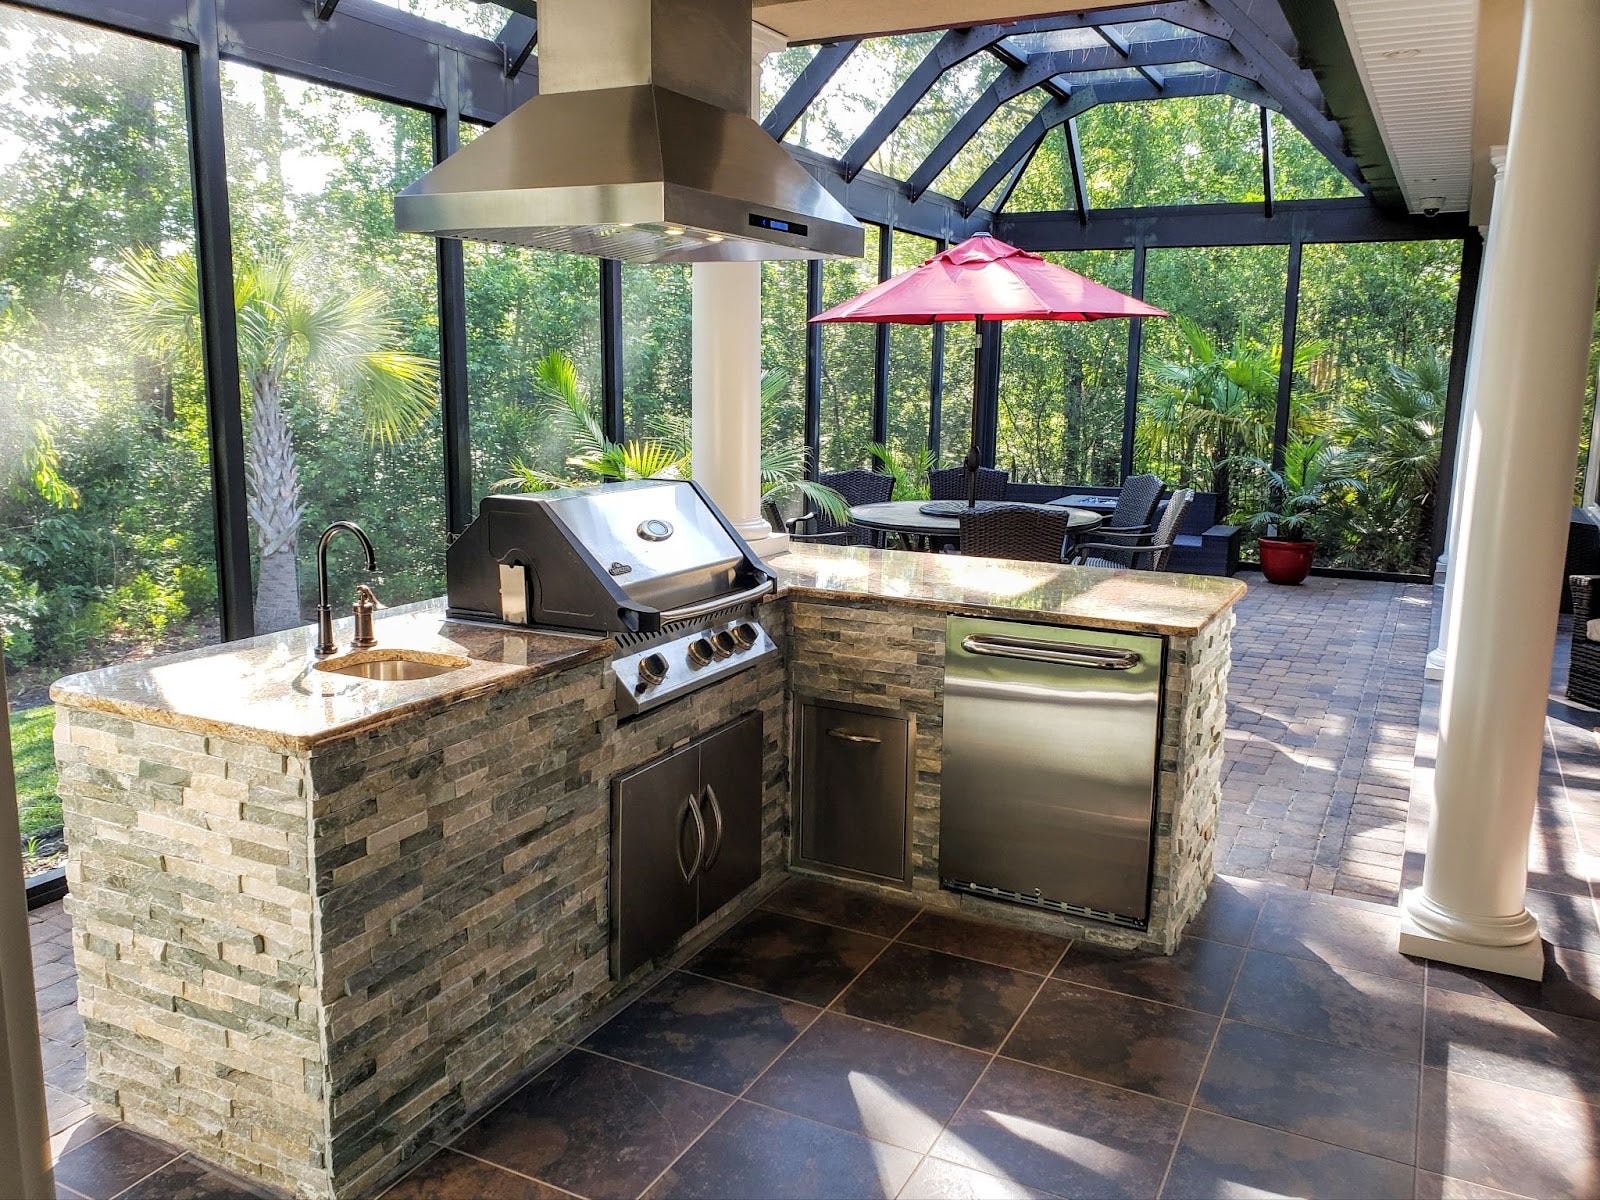 Luxurious outdoor kitchen with stainless steel appliances and stone cladding, complemented by a red umbrella patio set in a screened enclosure with a lush greenery backdrop.
